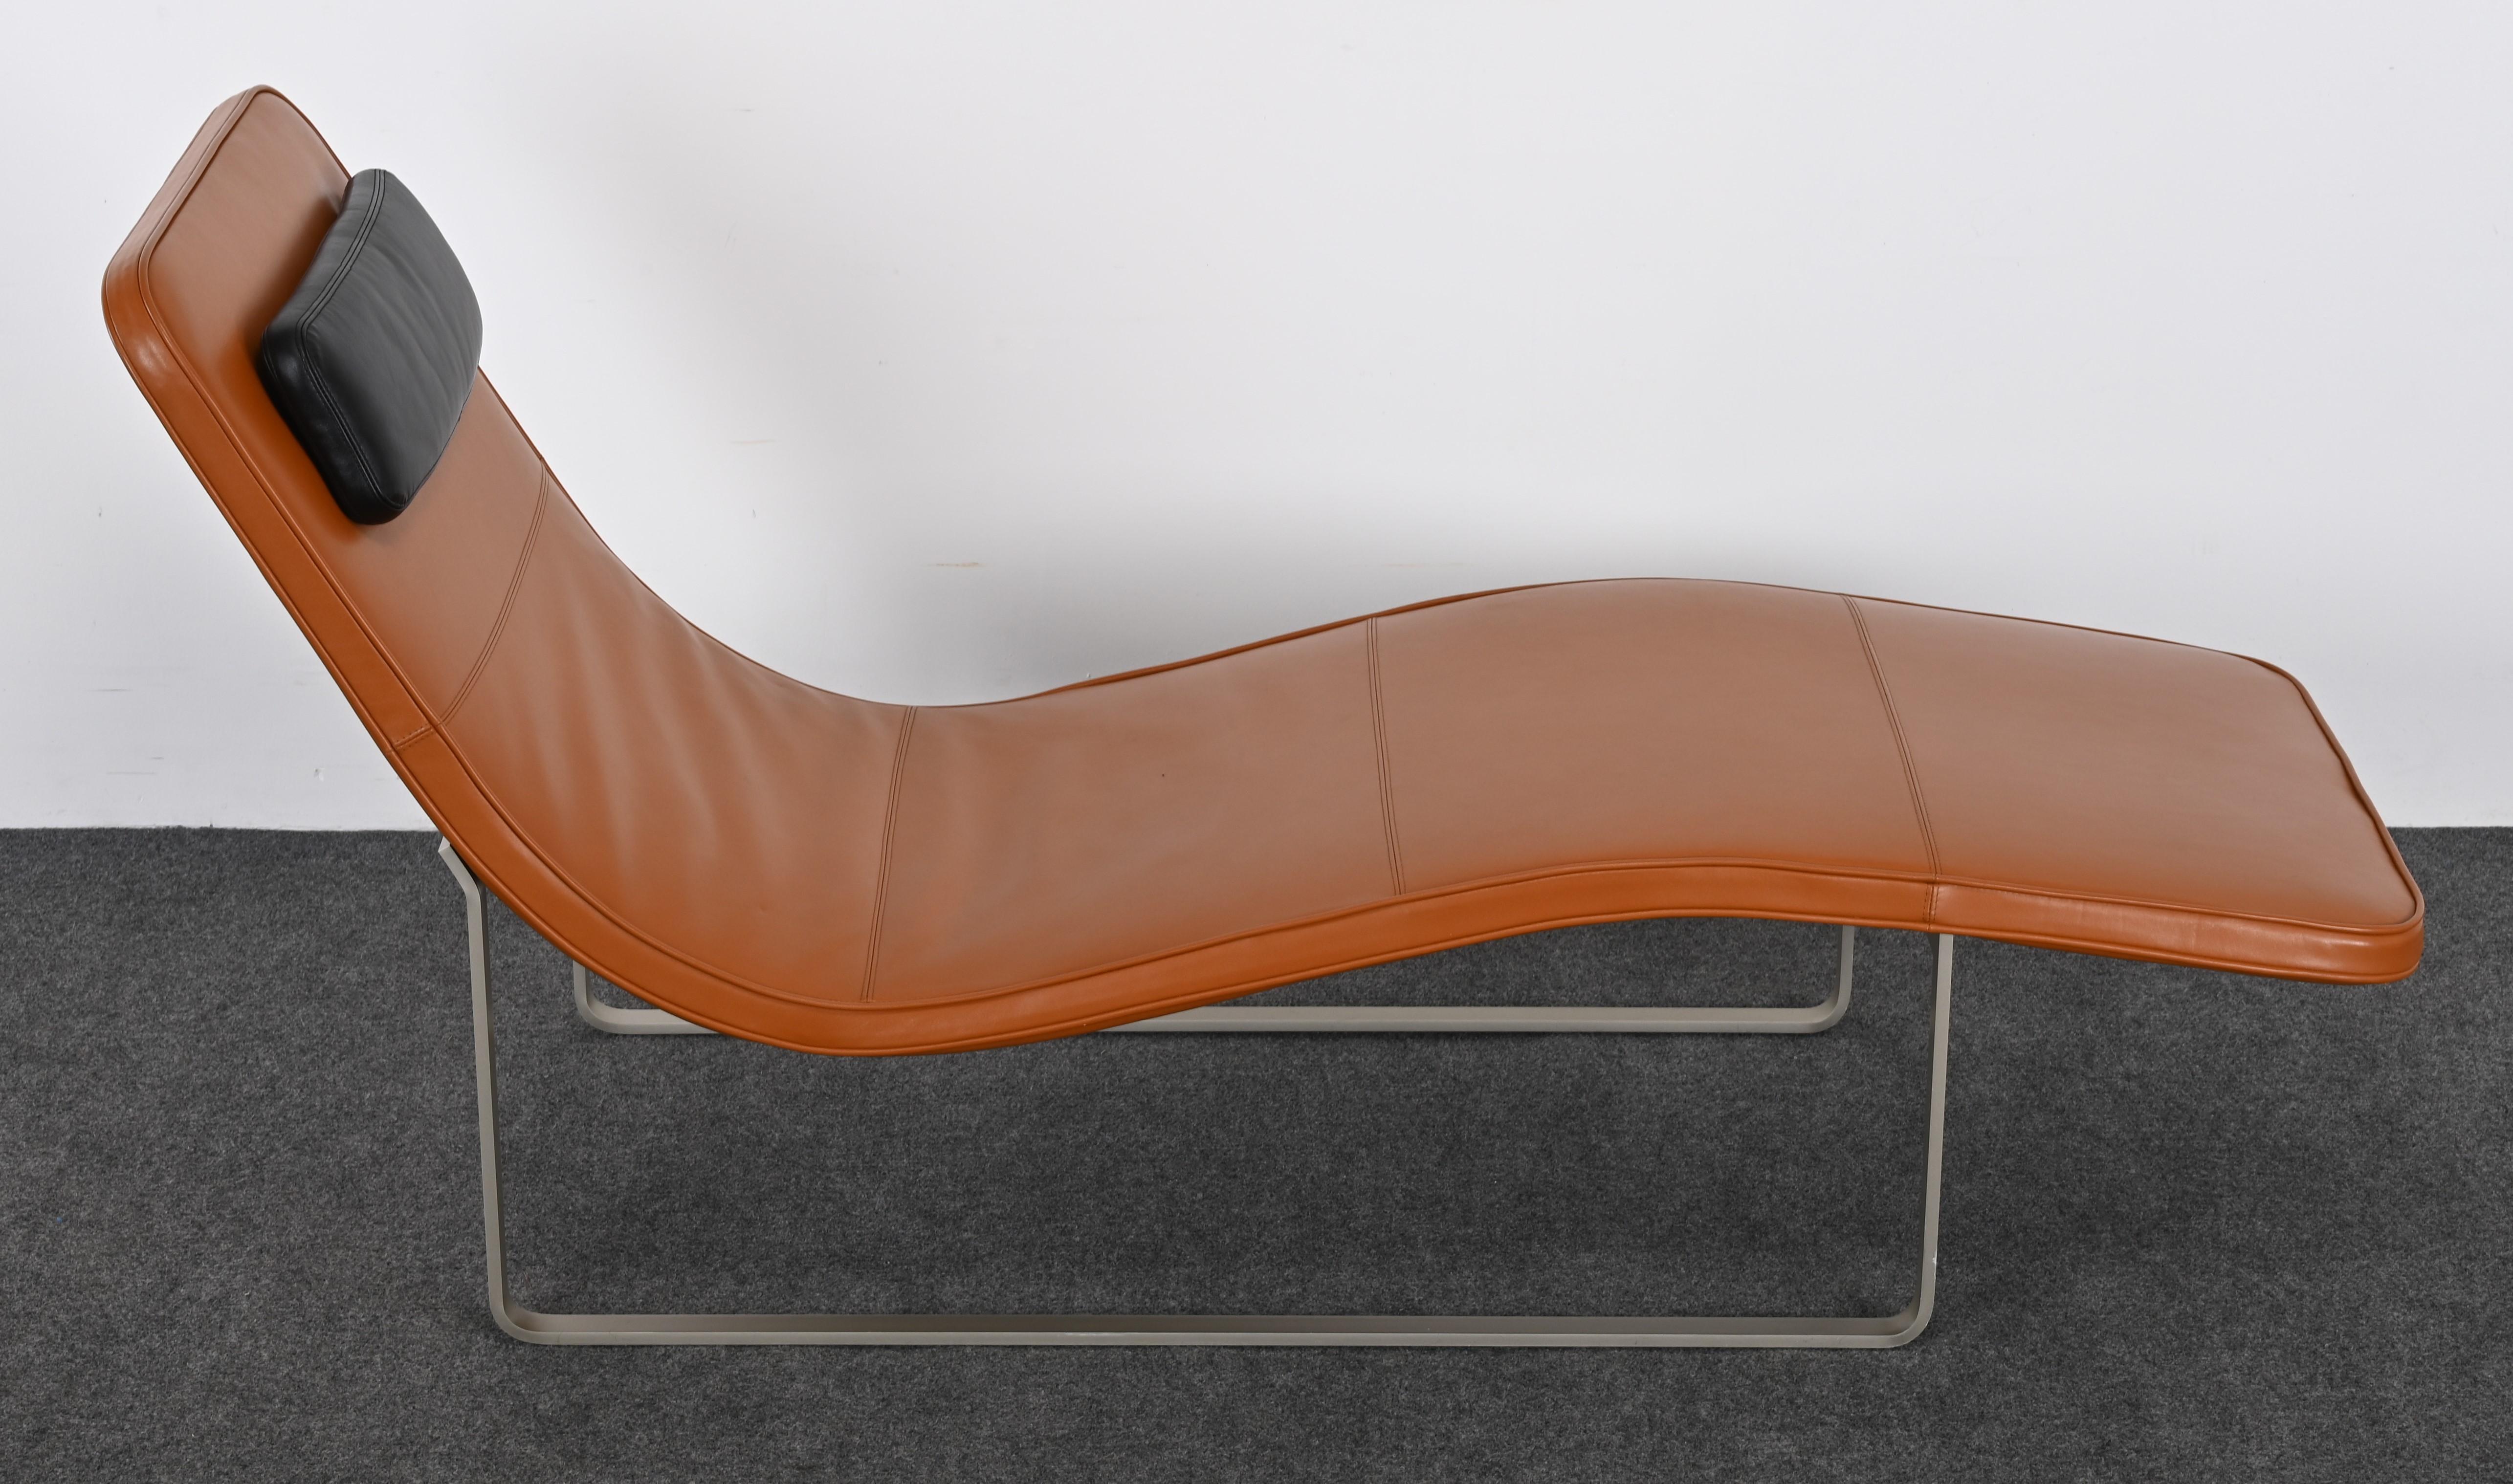 Contemporary Leather Chaise Lounge by Jeffrey Bernett for B&B Italia, 2001